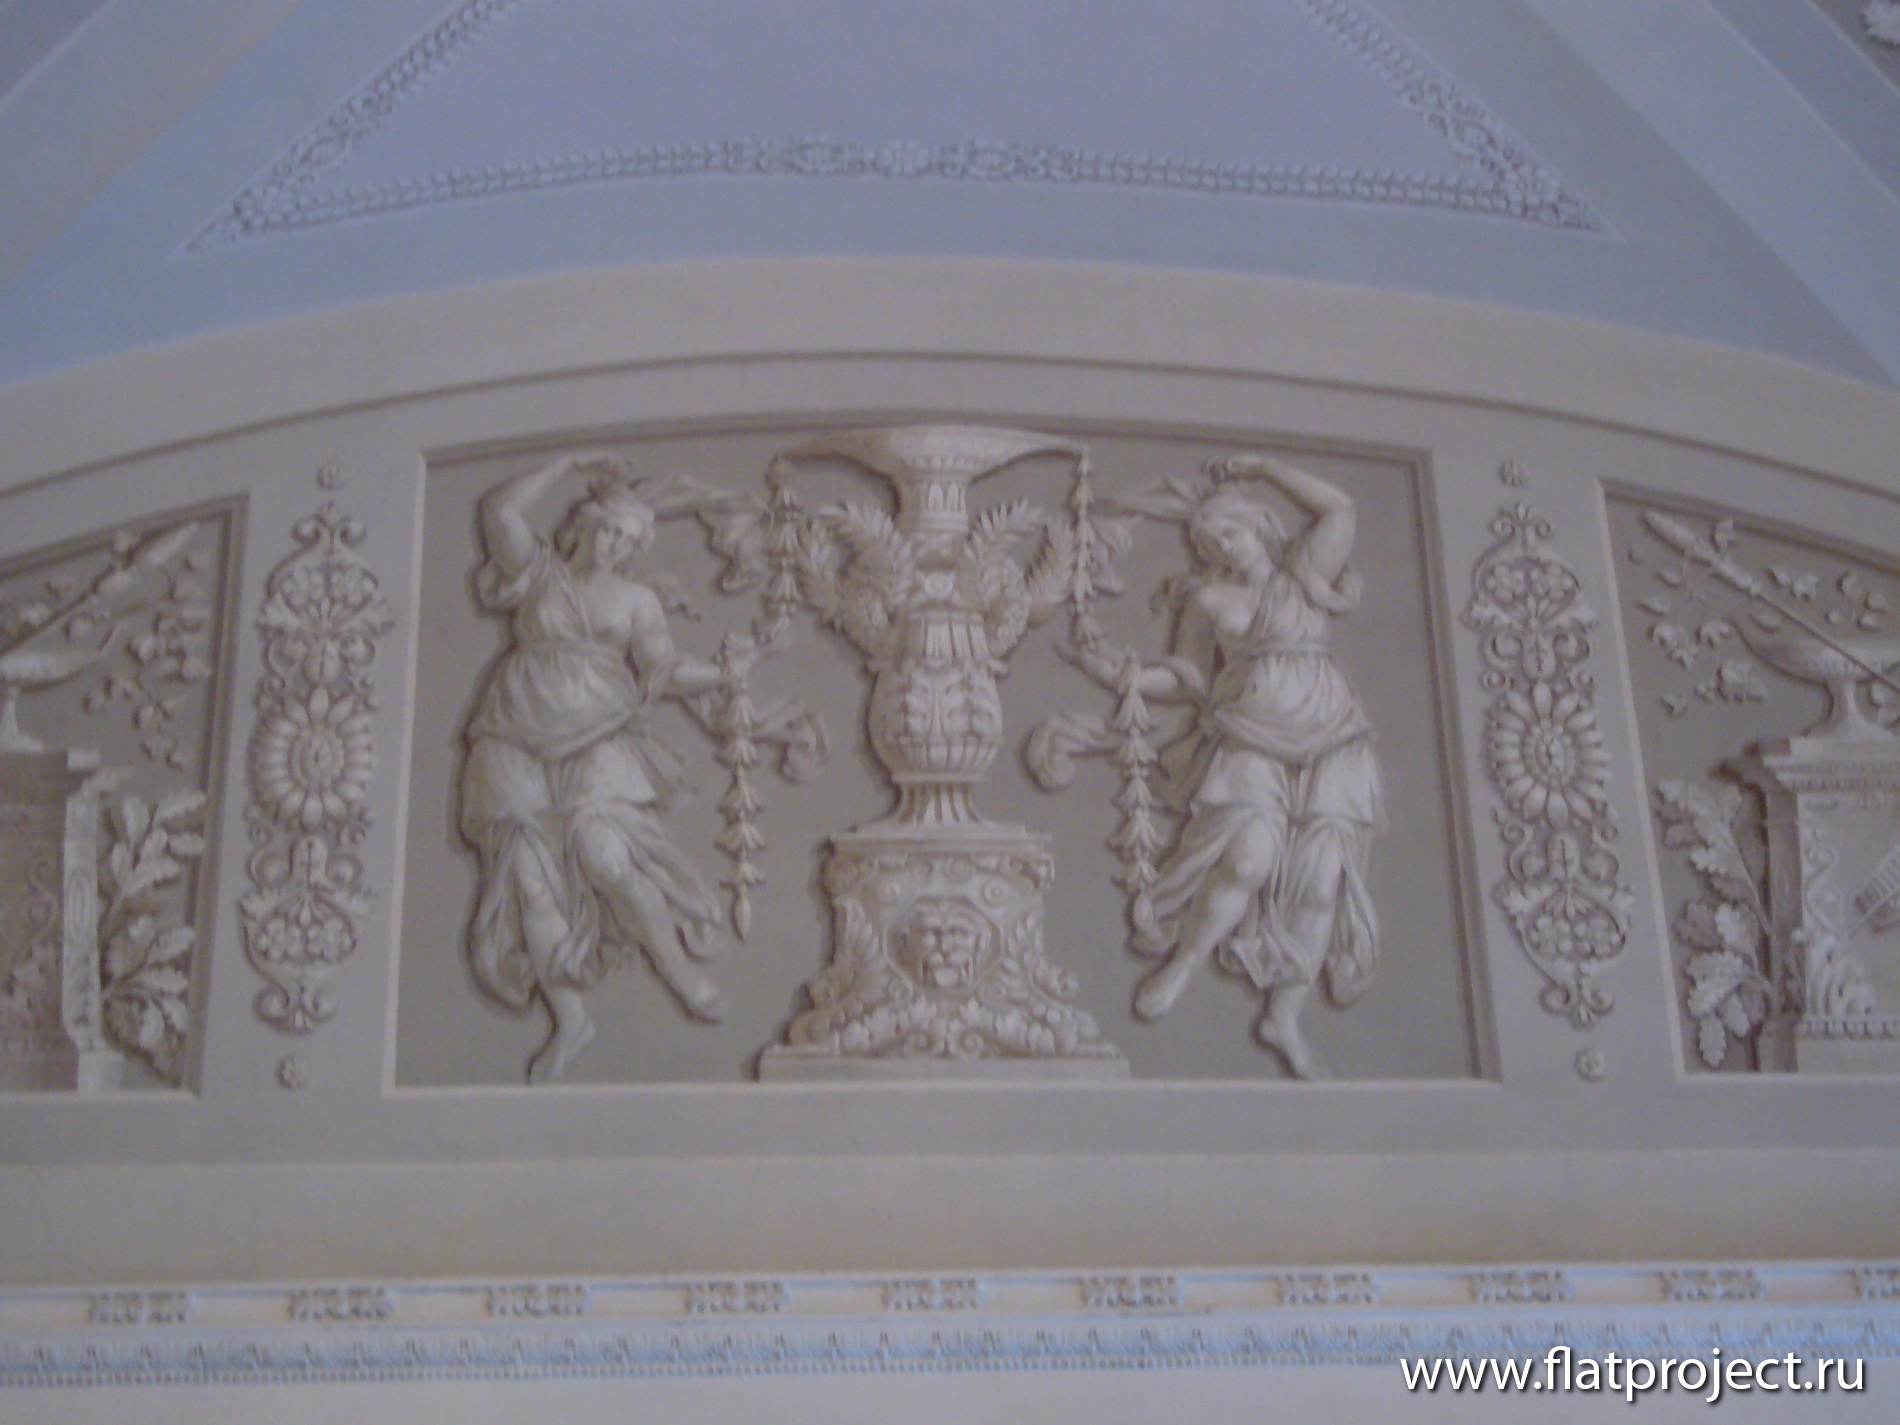 The State Russian museum interiors – photo 134